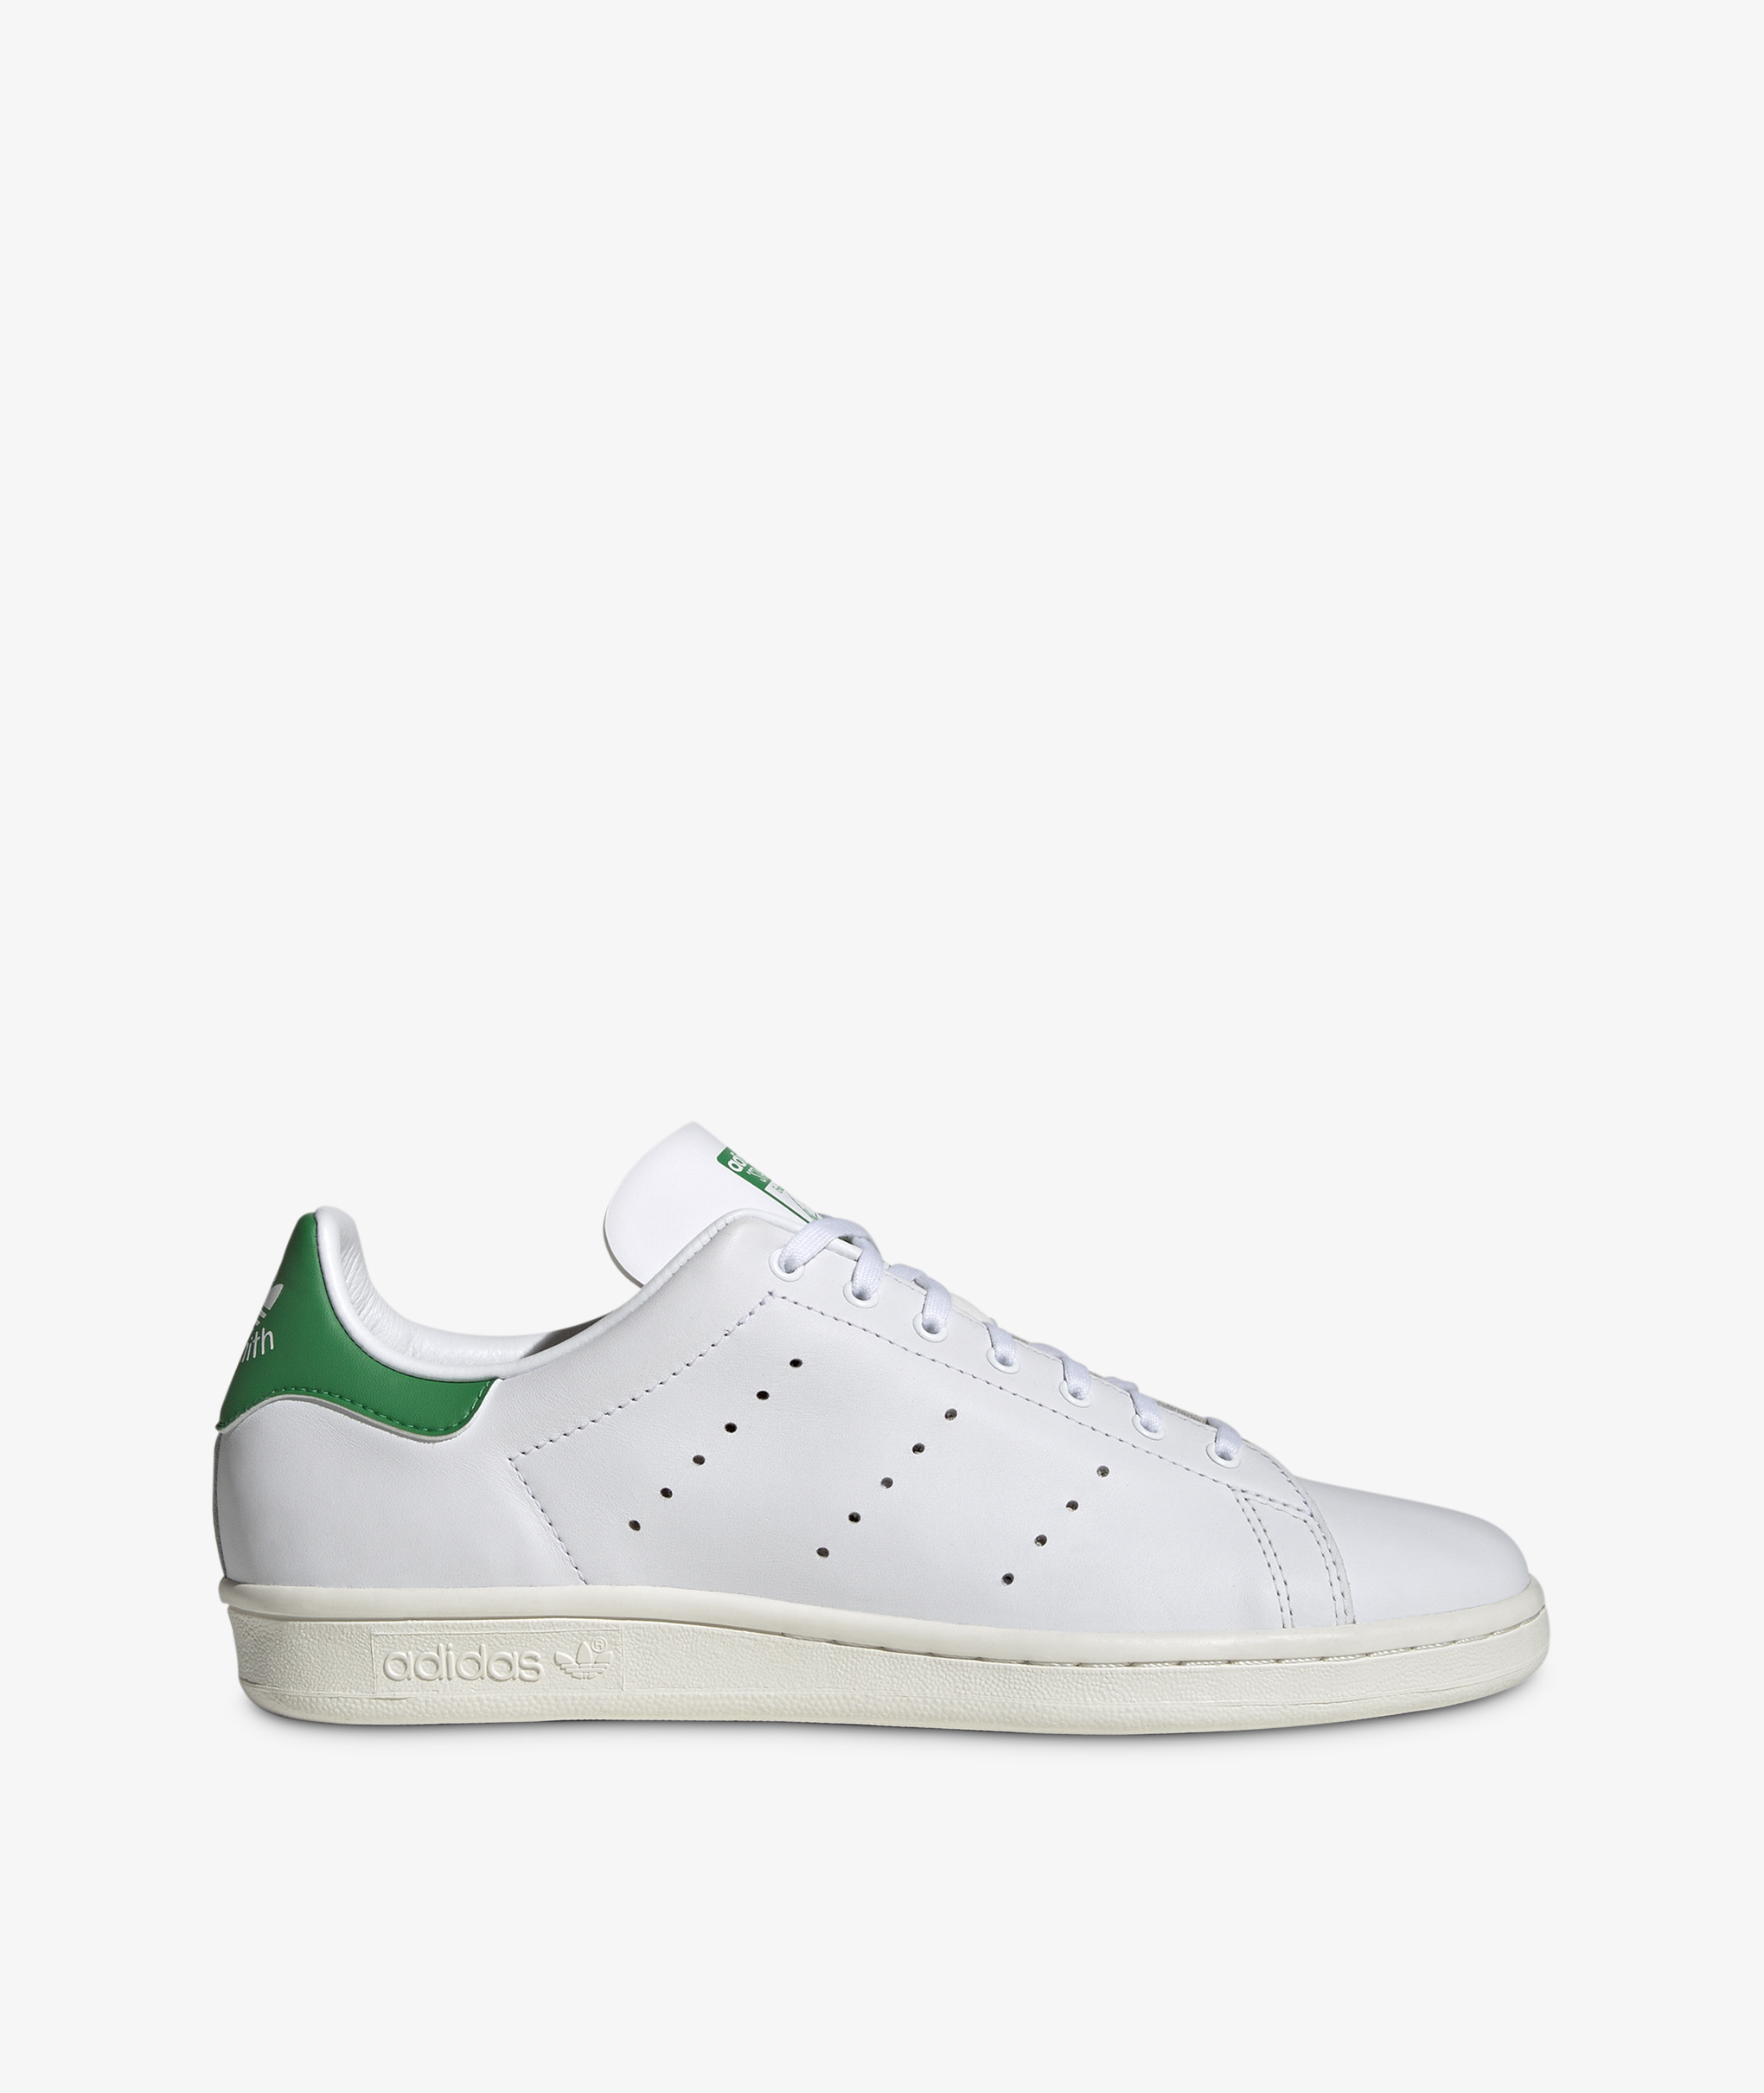 Store | Shipping - adidas Originals STAN SMITH 80s - FTWWHT/FTWWH